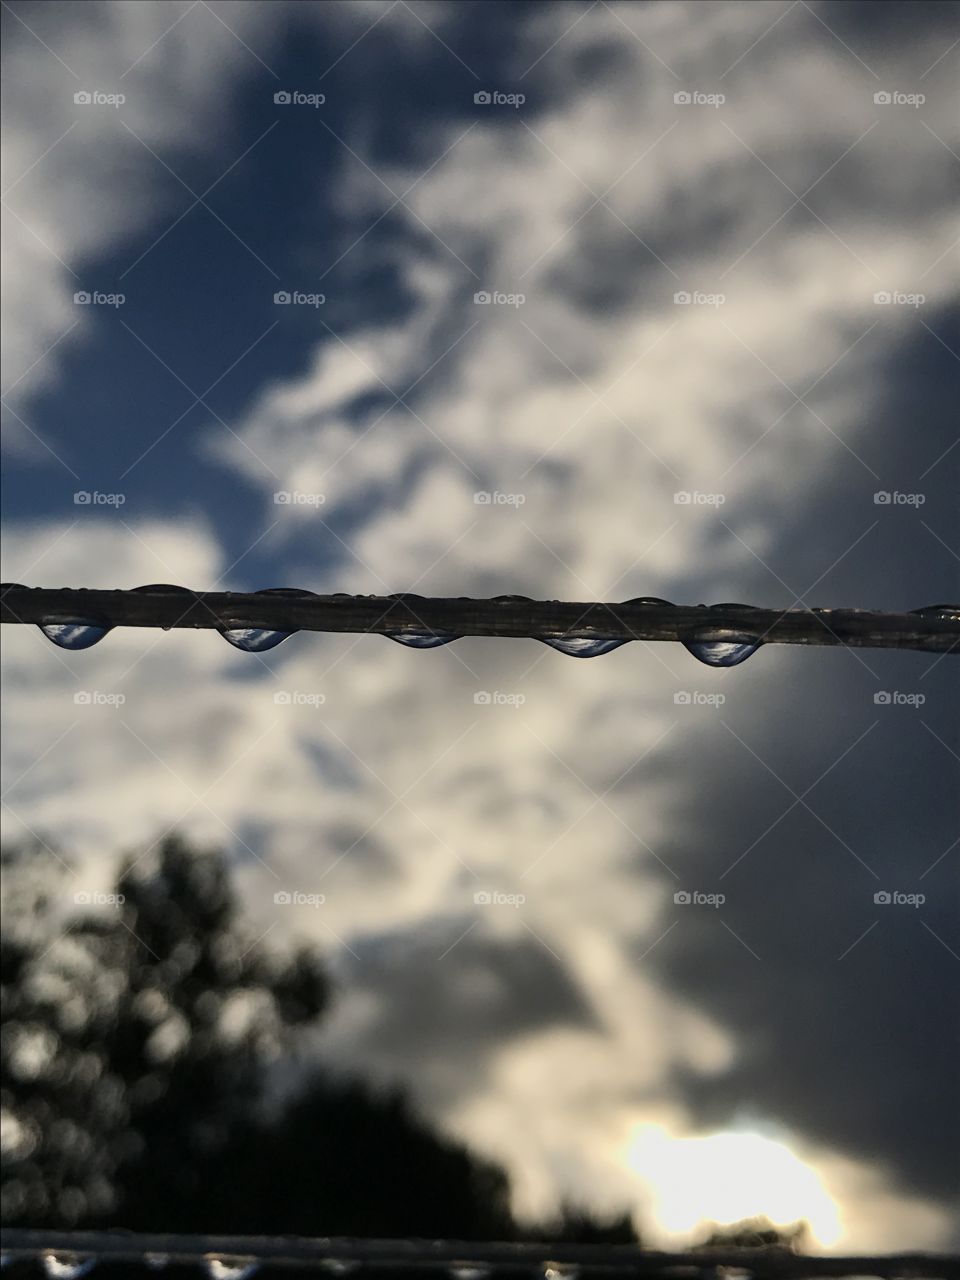 A few drops hangin on a washing line with a beautiful sky